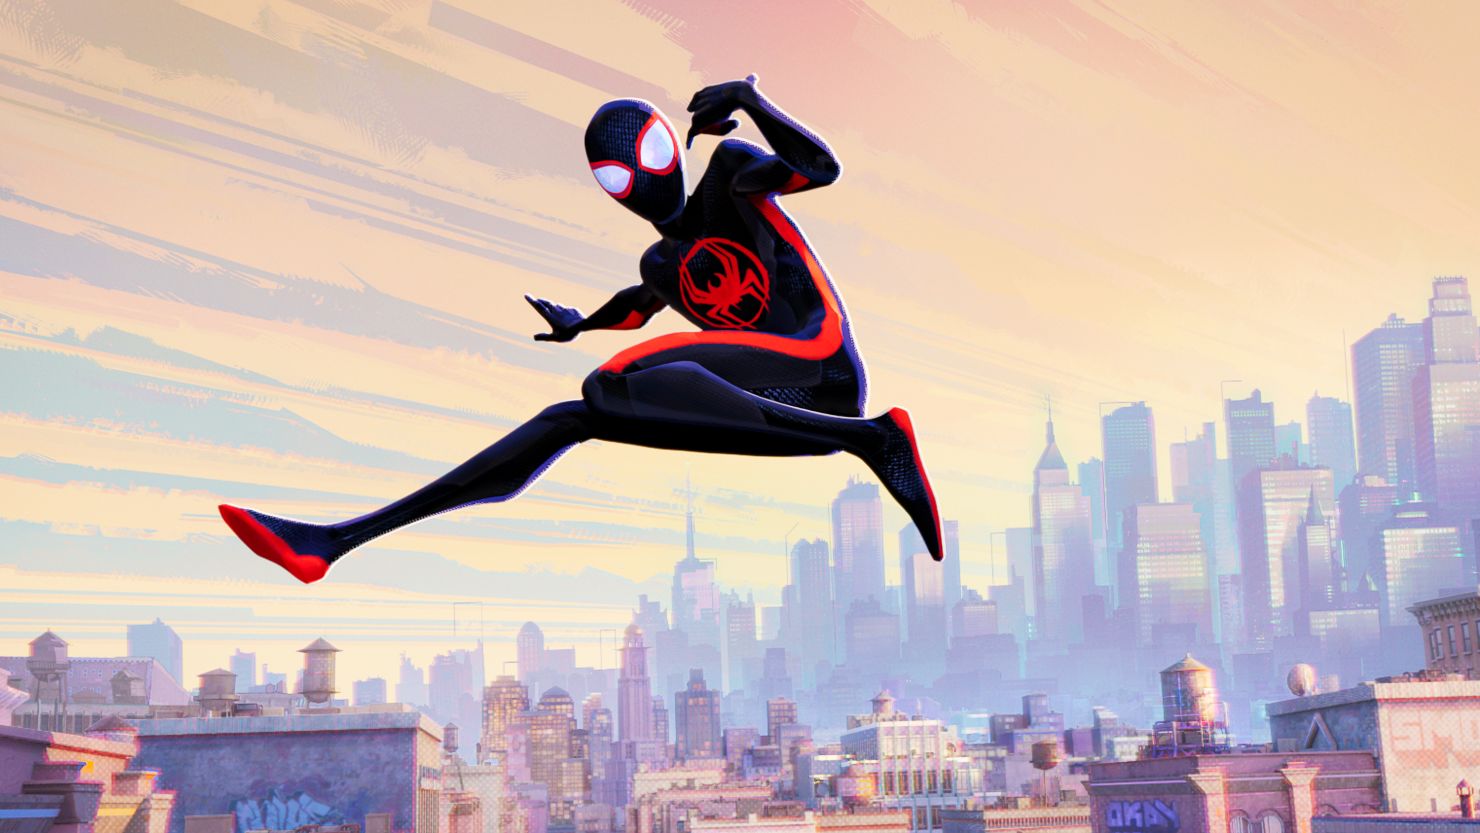 Miles Morales as Spider-Man (voiced by Shameik Moore) in "Spider-Man: Across the Spider-Verse."